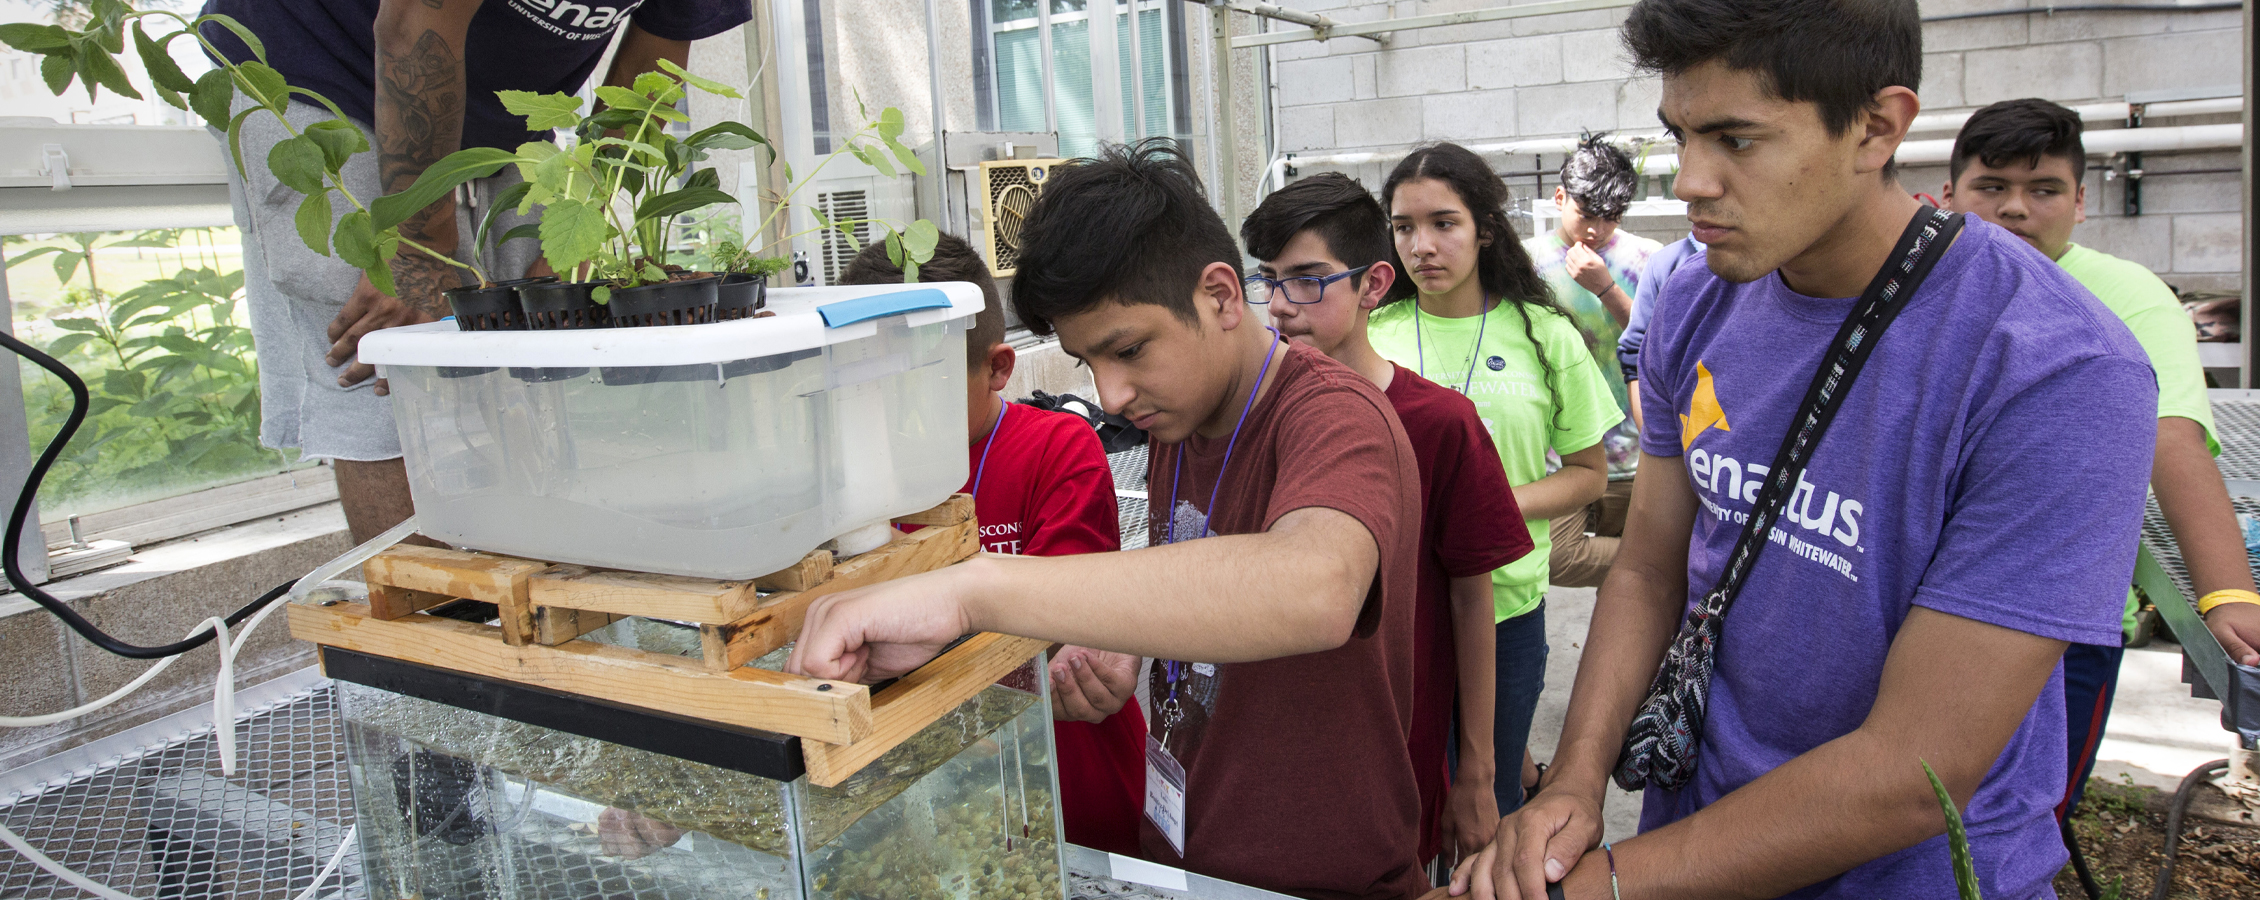 Students look at a system that is growing food using hydroponics.